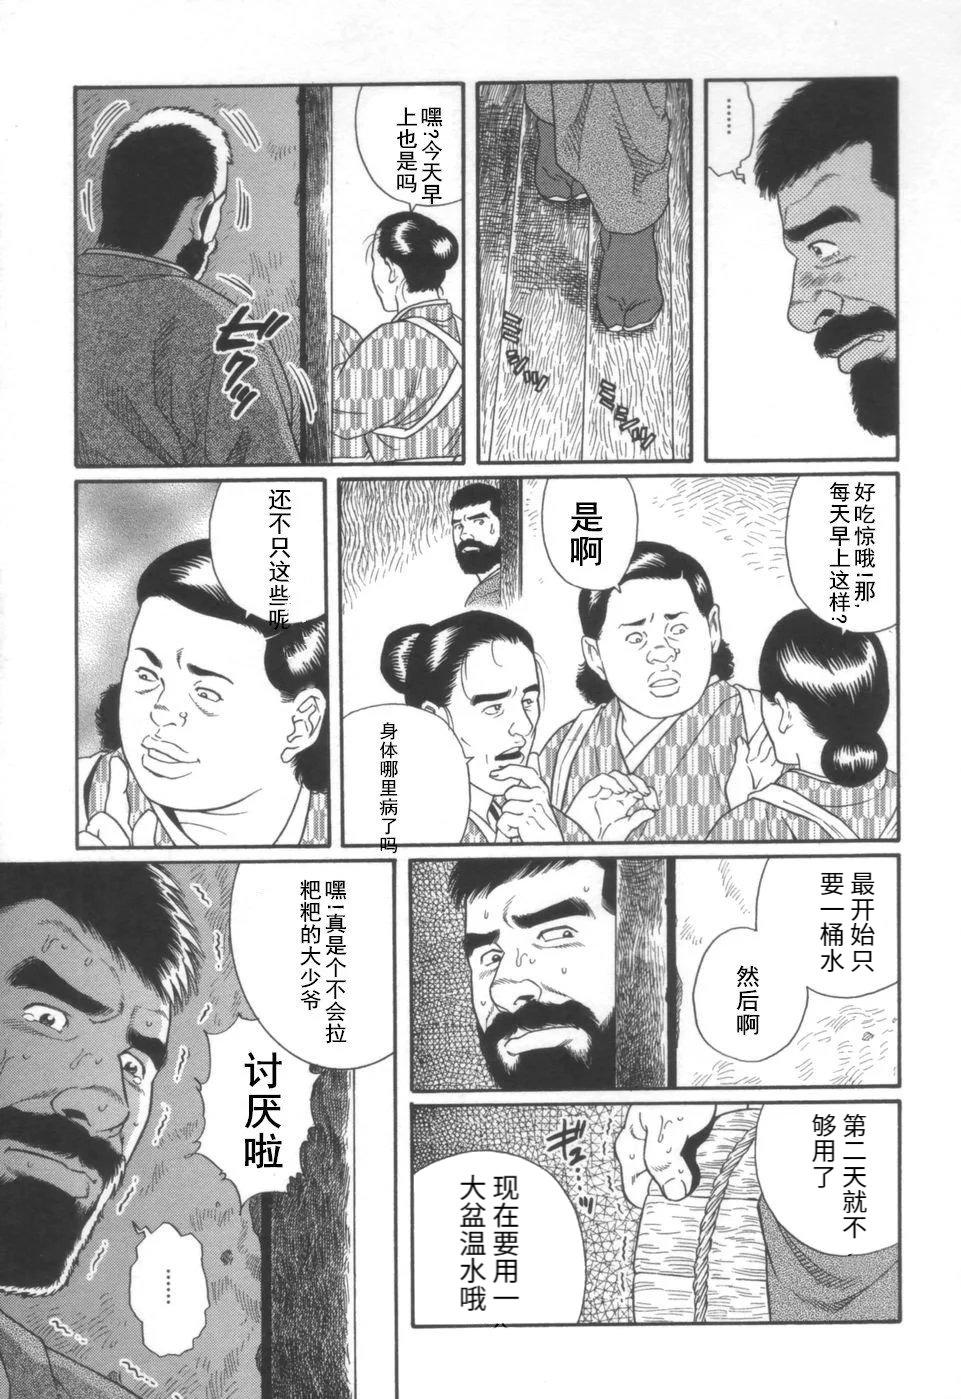 Perra Gedou no Ie Joukan | 邪道之家 Vol. 1 Ch.3 18yearsold - Page 3